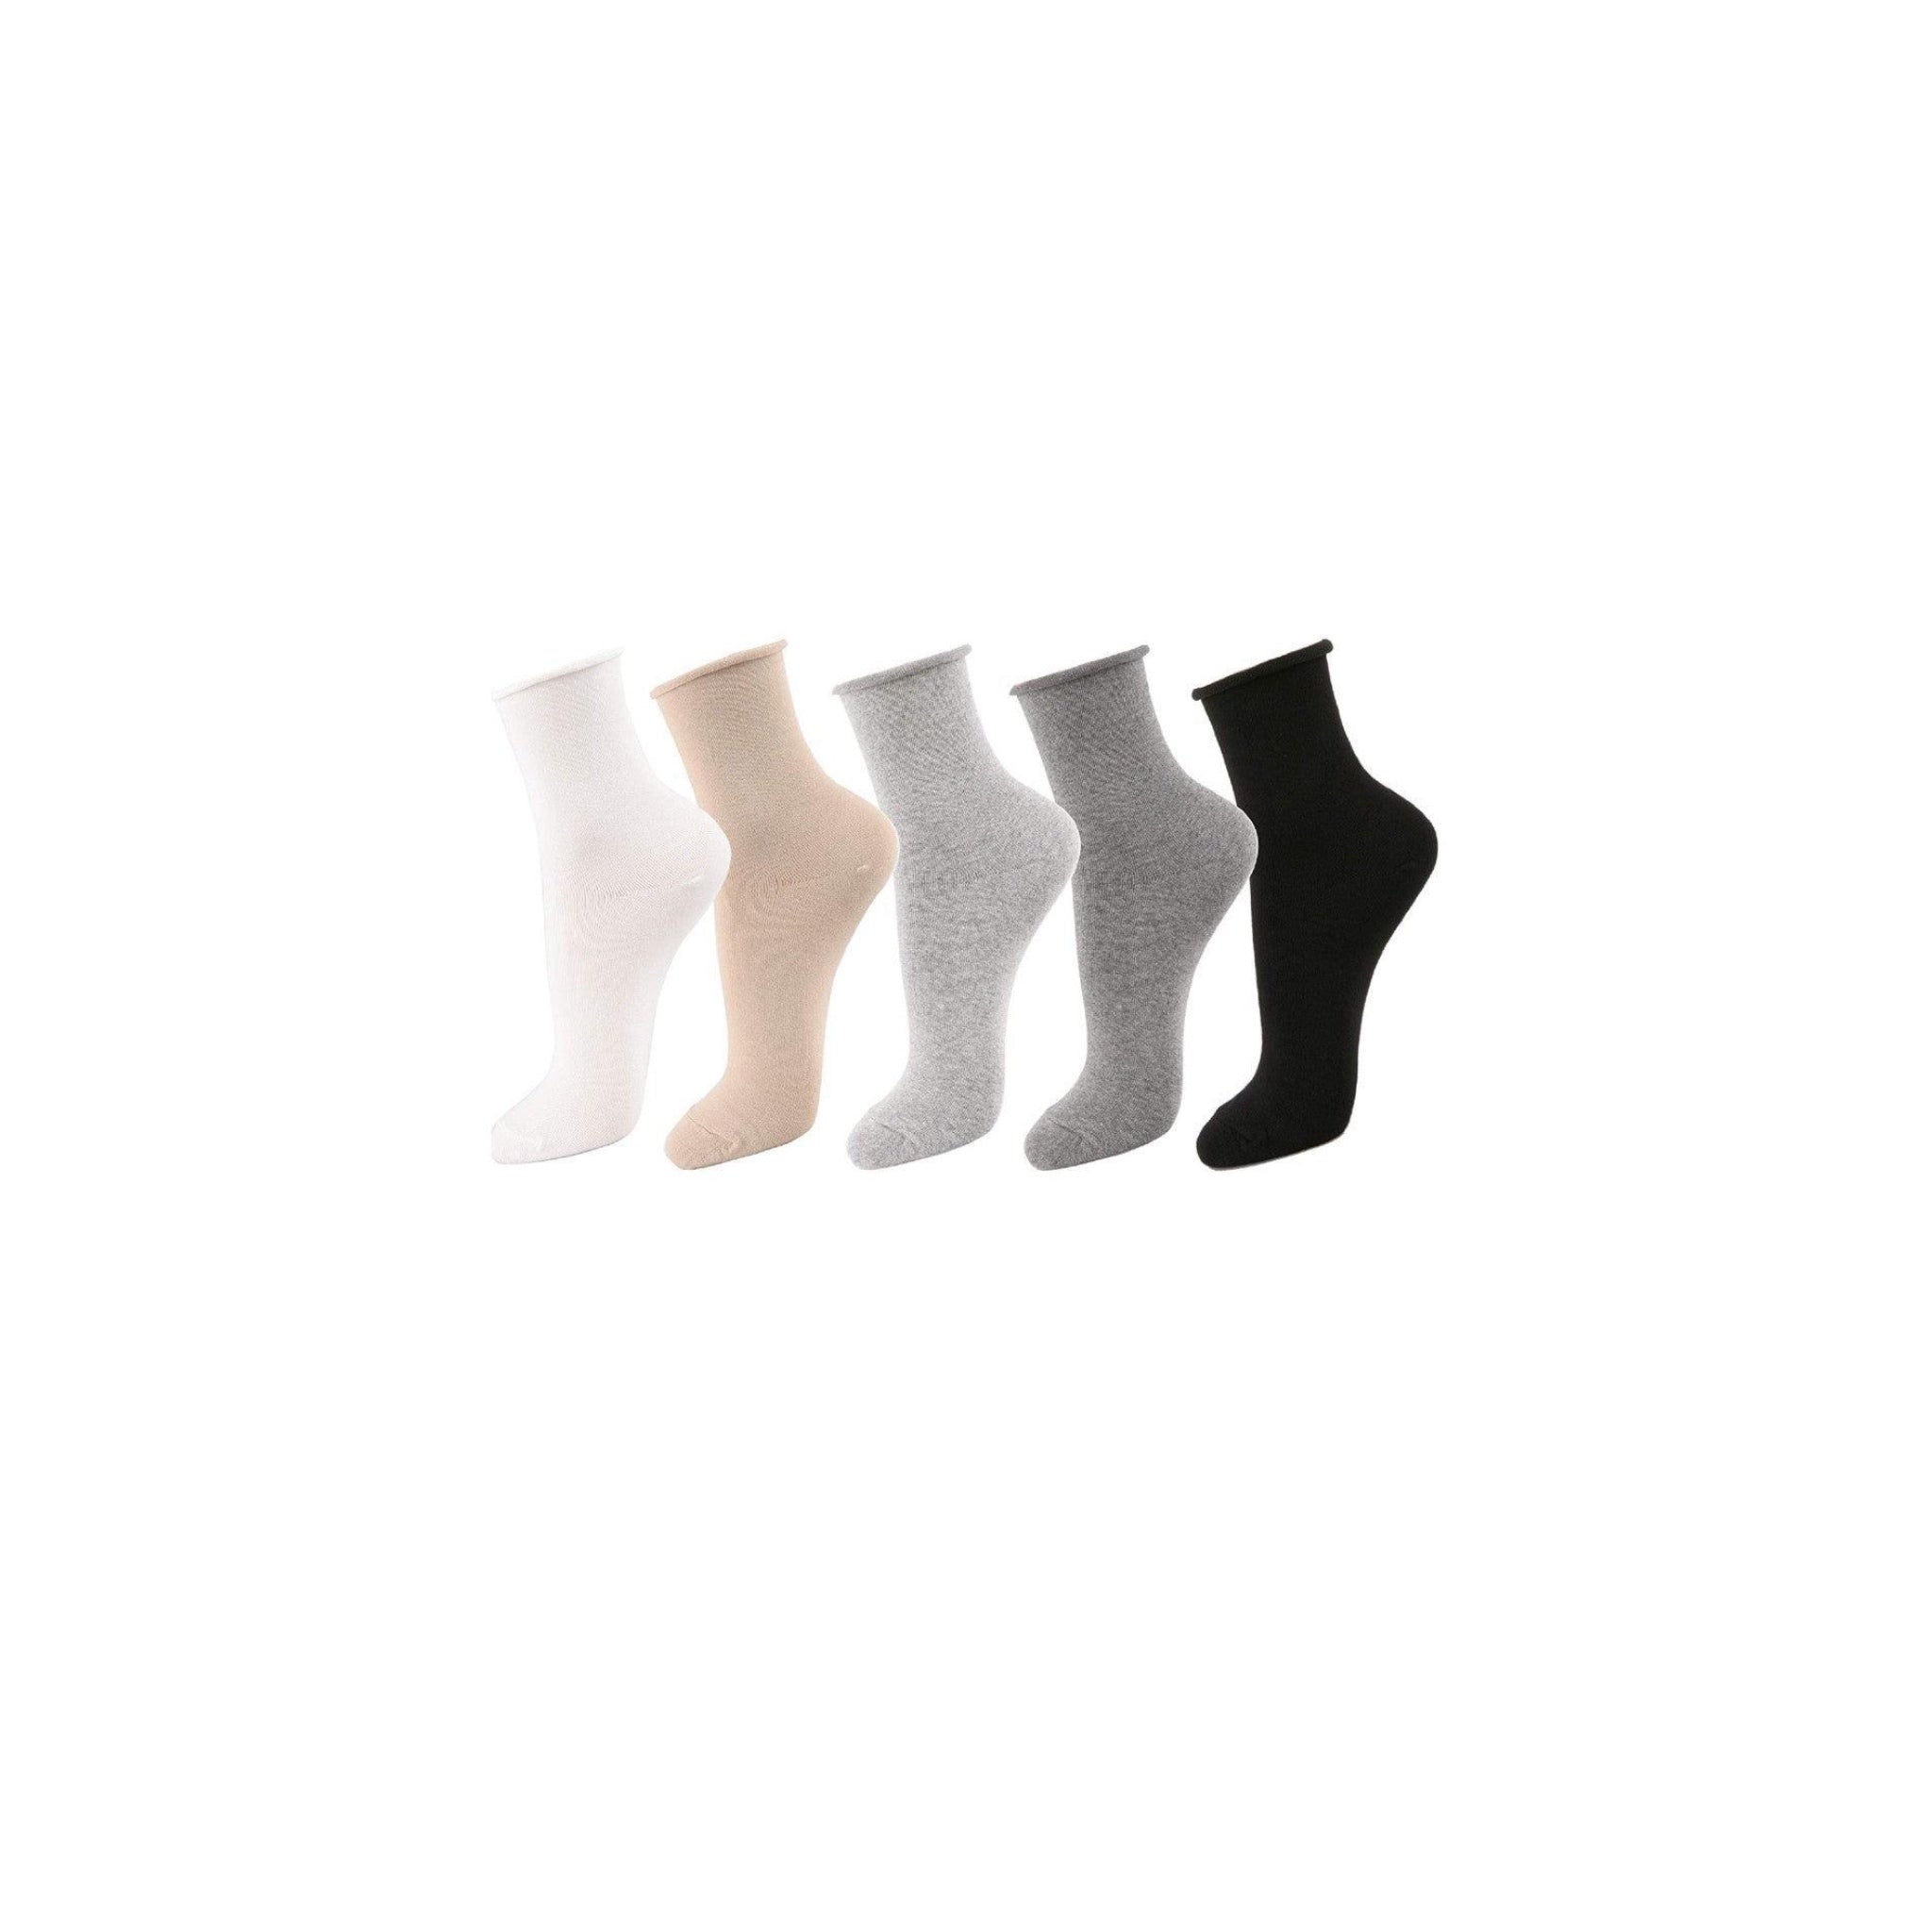 Roll Top and Relaxed Fit Socks – The Sock Monster